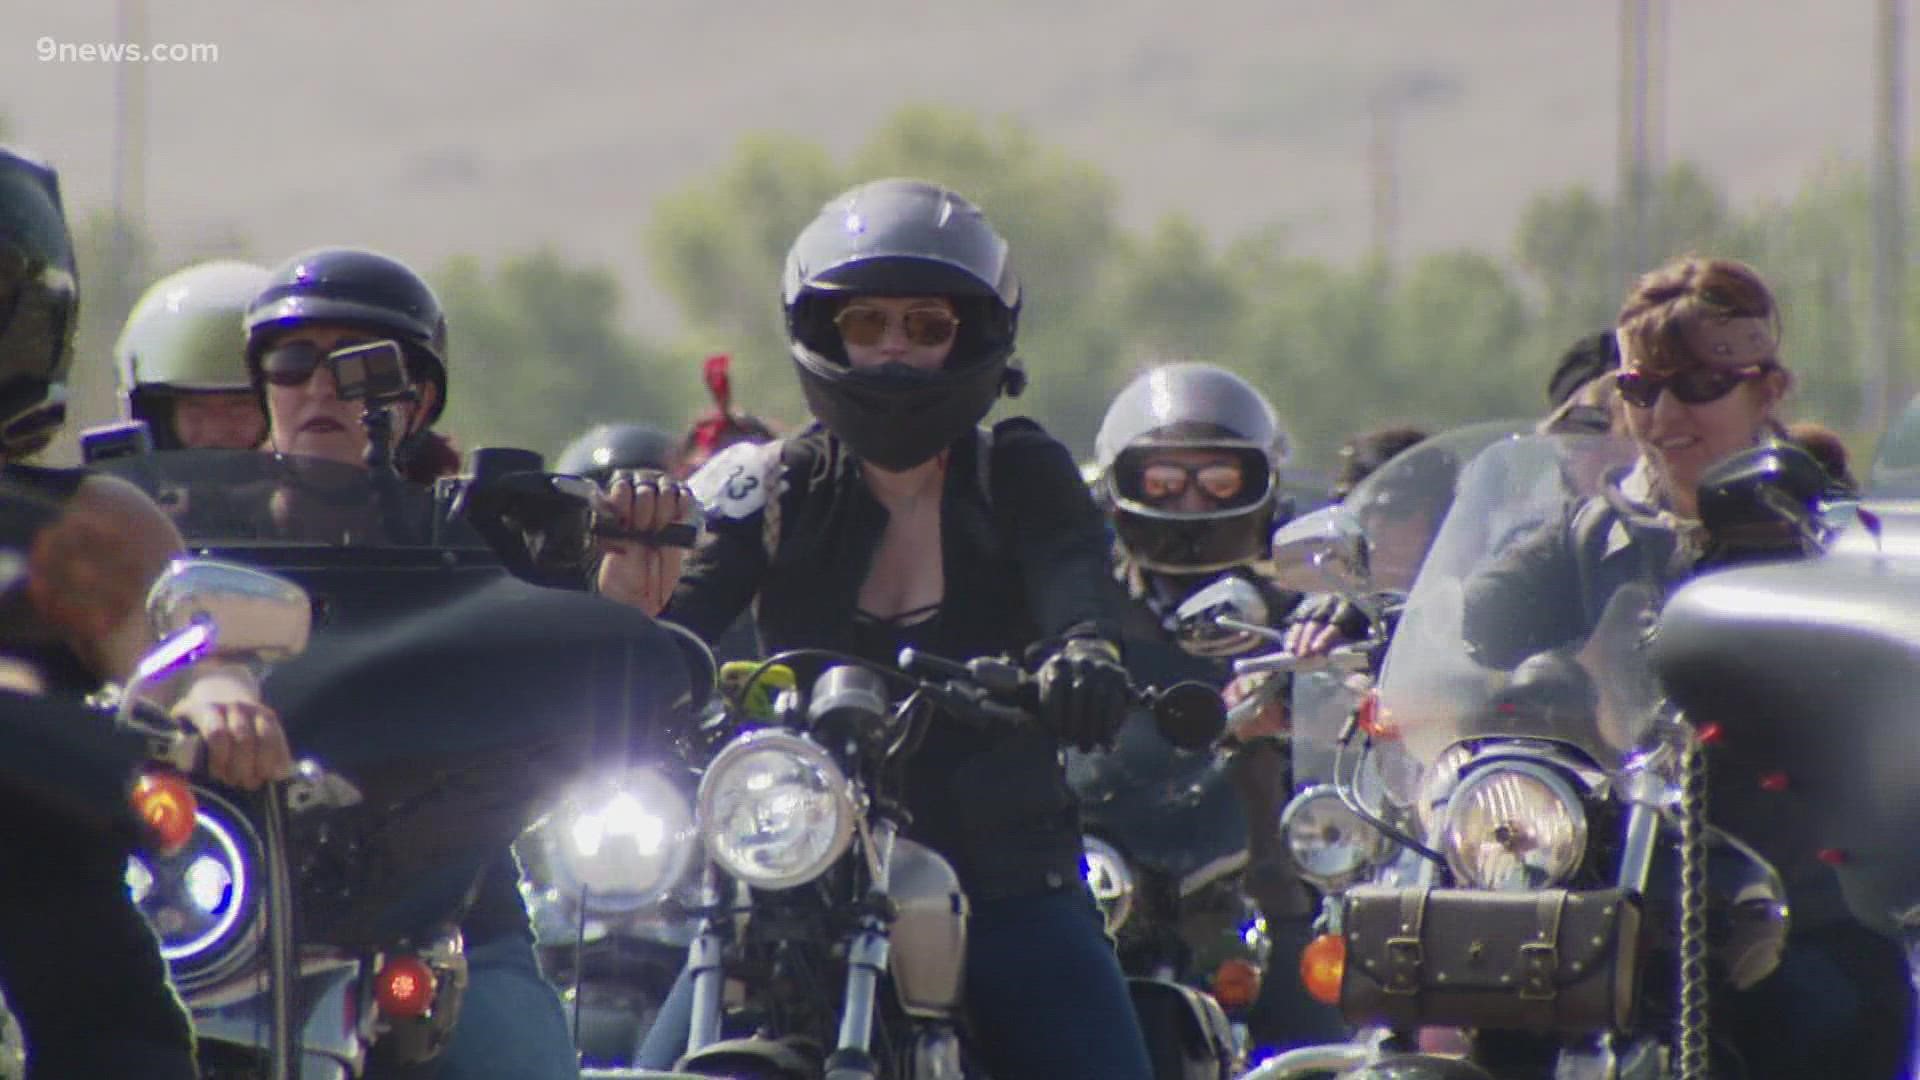 A charity benefit for Firefly Autism at Bandimere Speedway is trying to break the world record for the most women motorcyclist in the same place and in a ride.